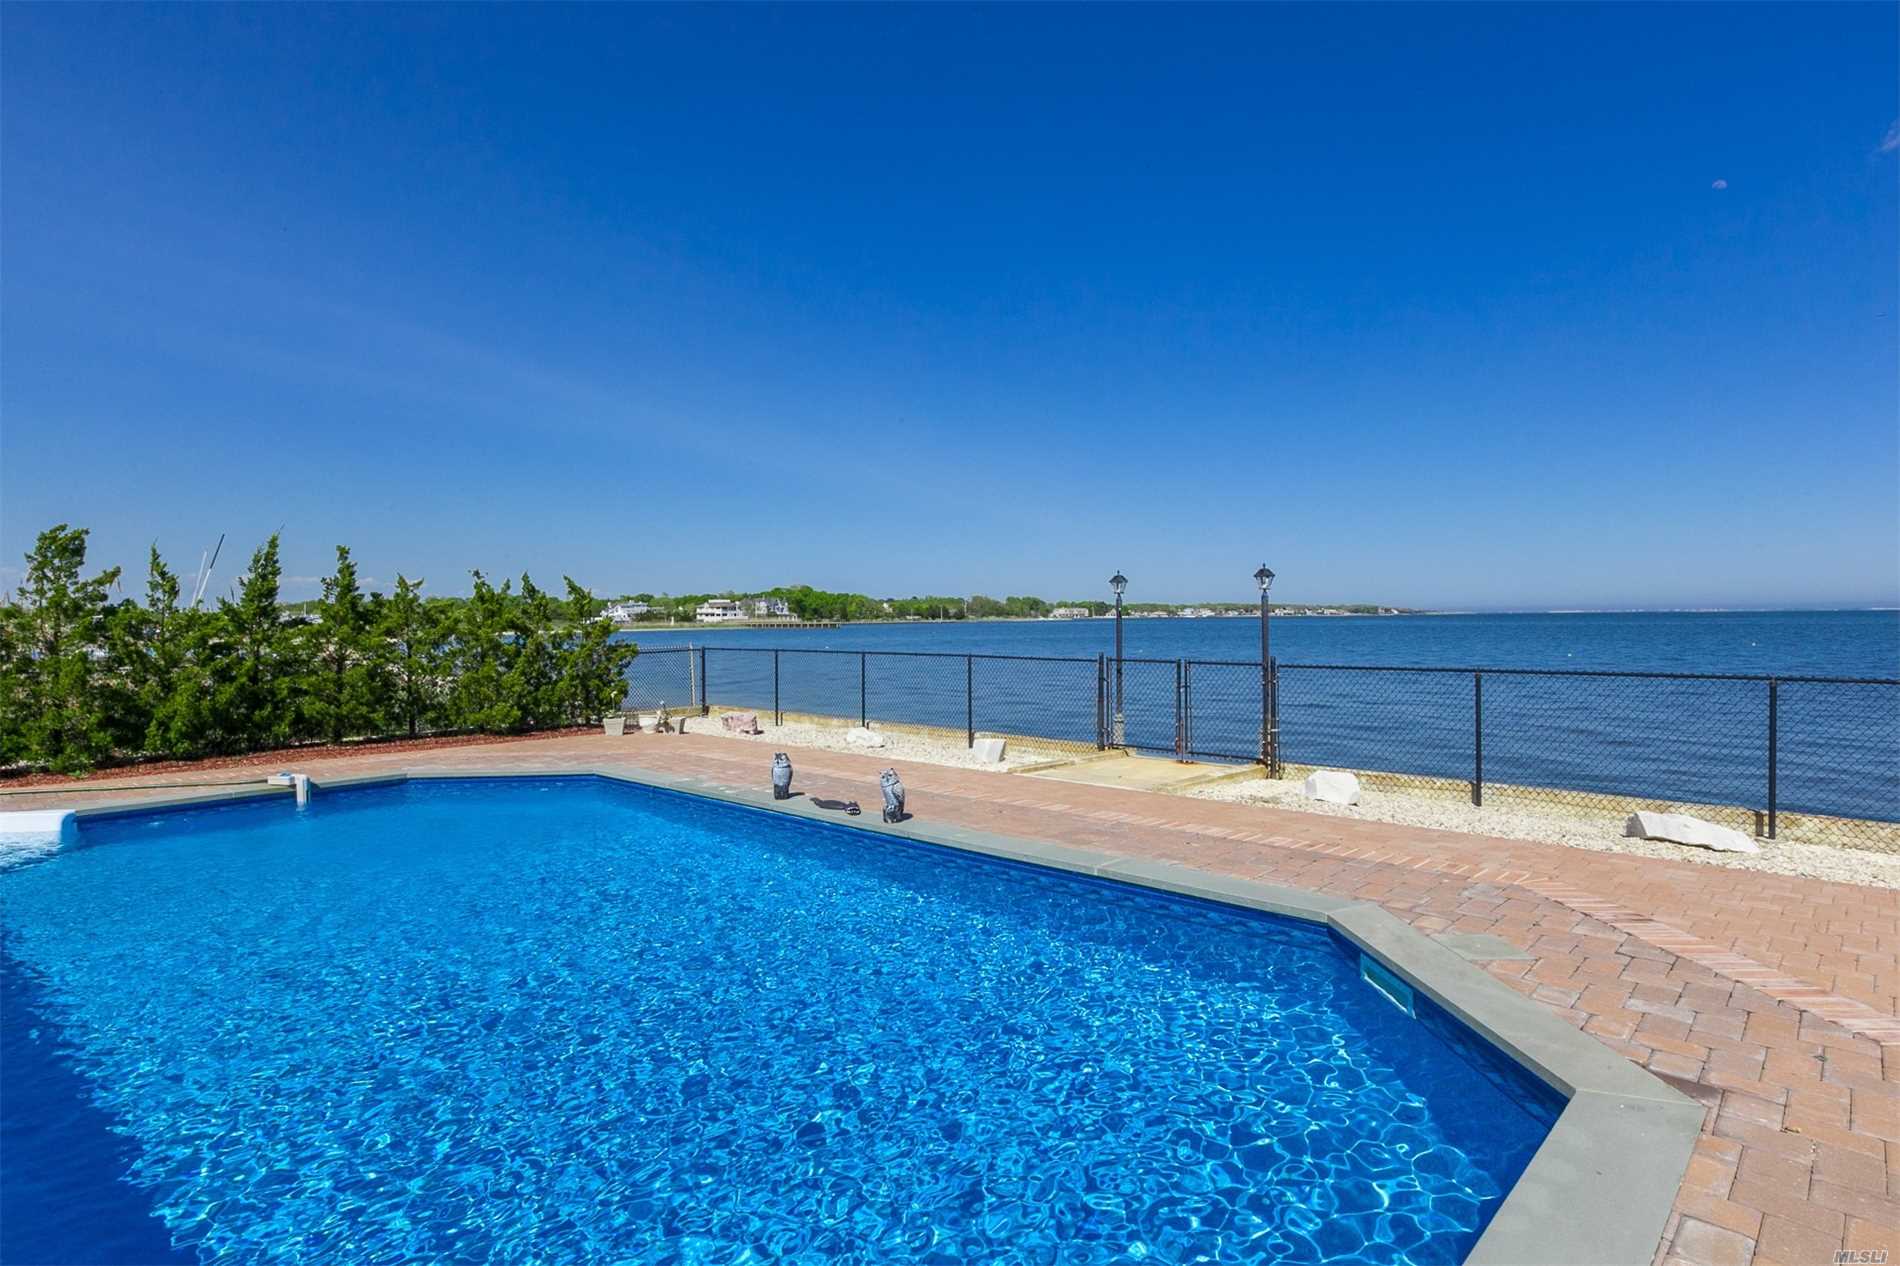 Incredible Bayfront Home With Amazing Waterviews Features: Great Room With Floor To Ceiling Windows & Fireplace, Eik W/Granite Counter Tops, Formal Liv Rm/Game Room, Master Bedroom Suite W/Walk In Closet, Full Bathroom And Terrace, 3 Additional Bedrooms, 1 Car Garage. Updated Central Air Conditioning & Heating System, In Ground Pool W/Pavers, Stunning Views Of The Bay. You Don&rsquo;t Want To Miss This One!!!